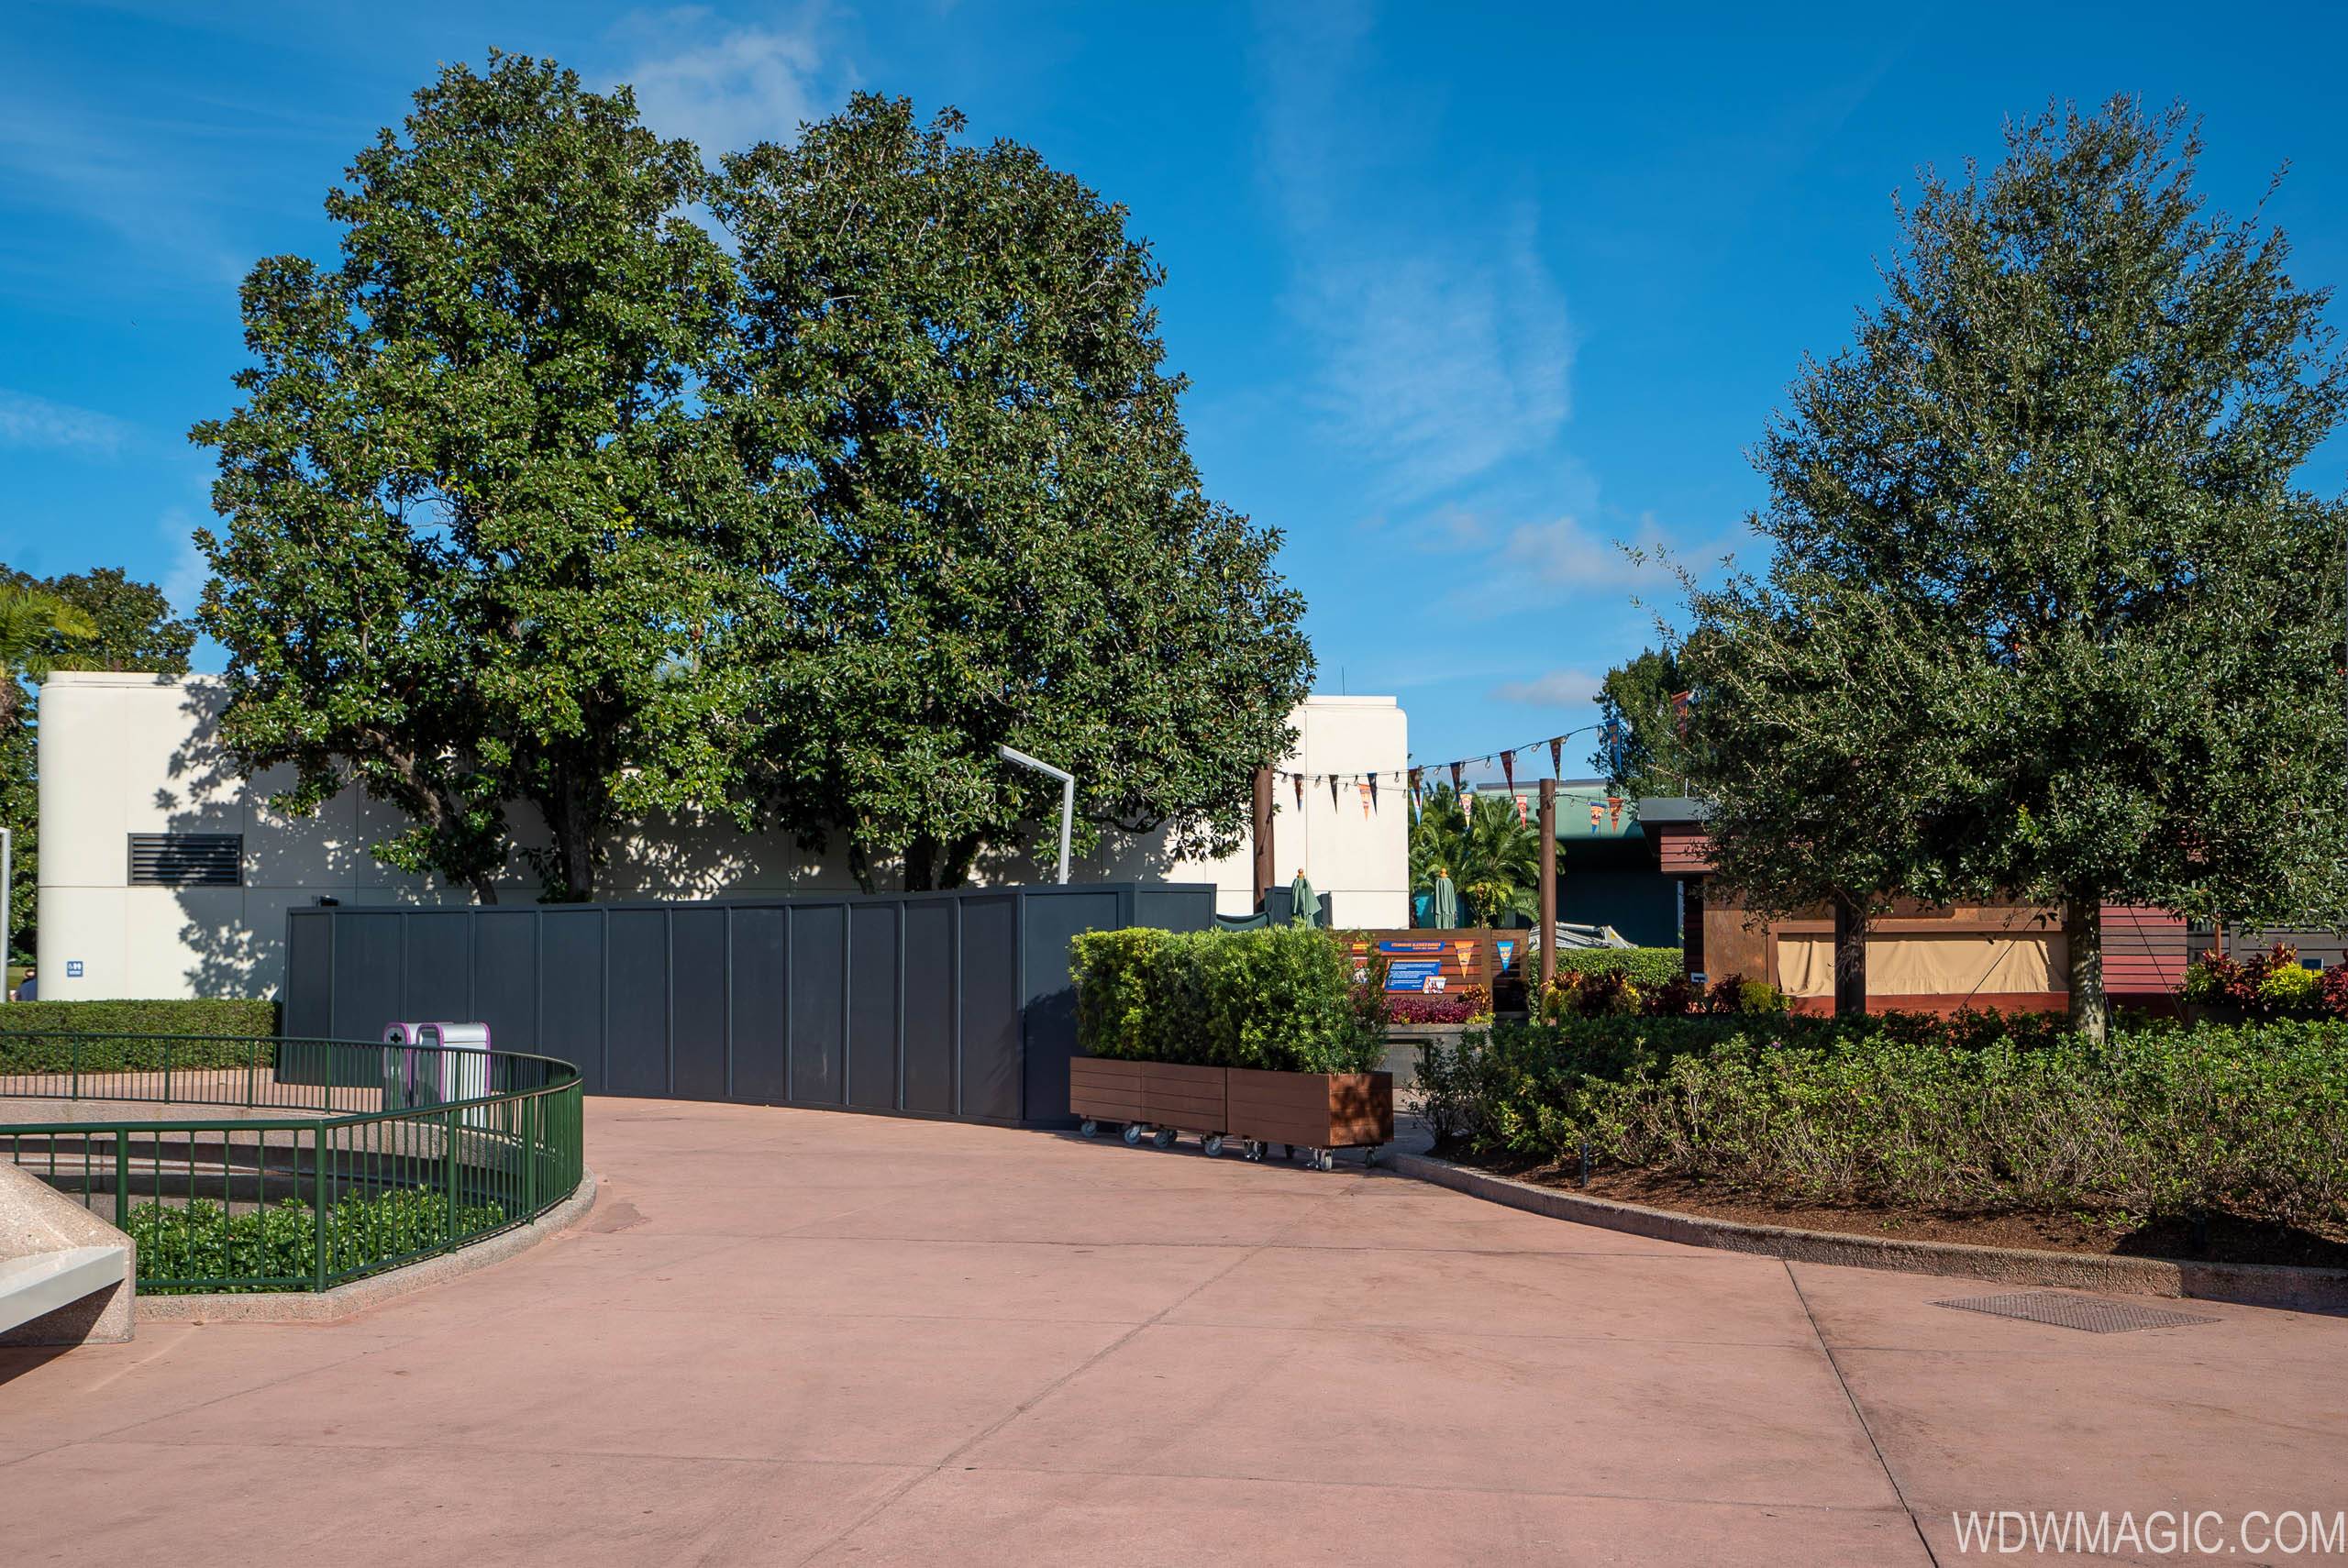 Epcot Future World West Demolition and Construction Walls - December 2019